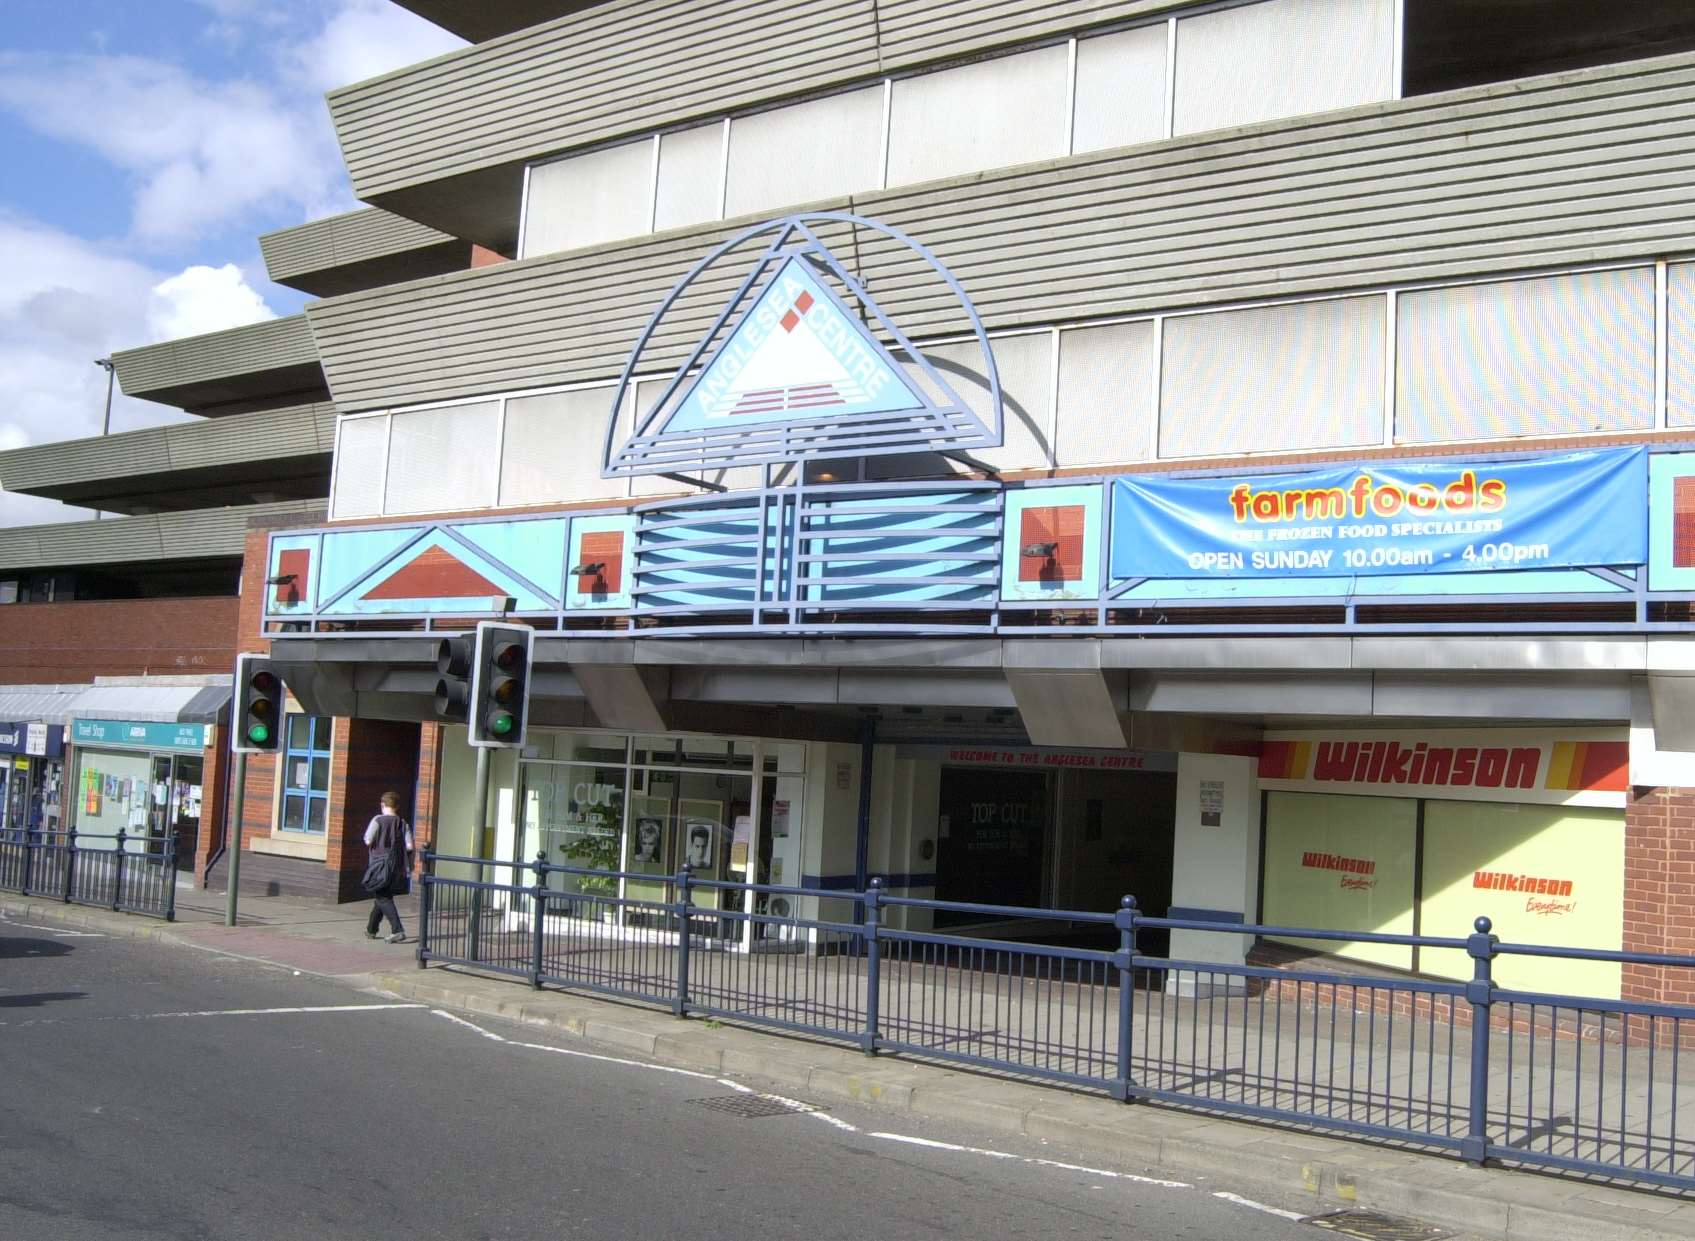 The Anglesea shopping centre in Gravesend